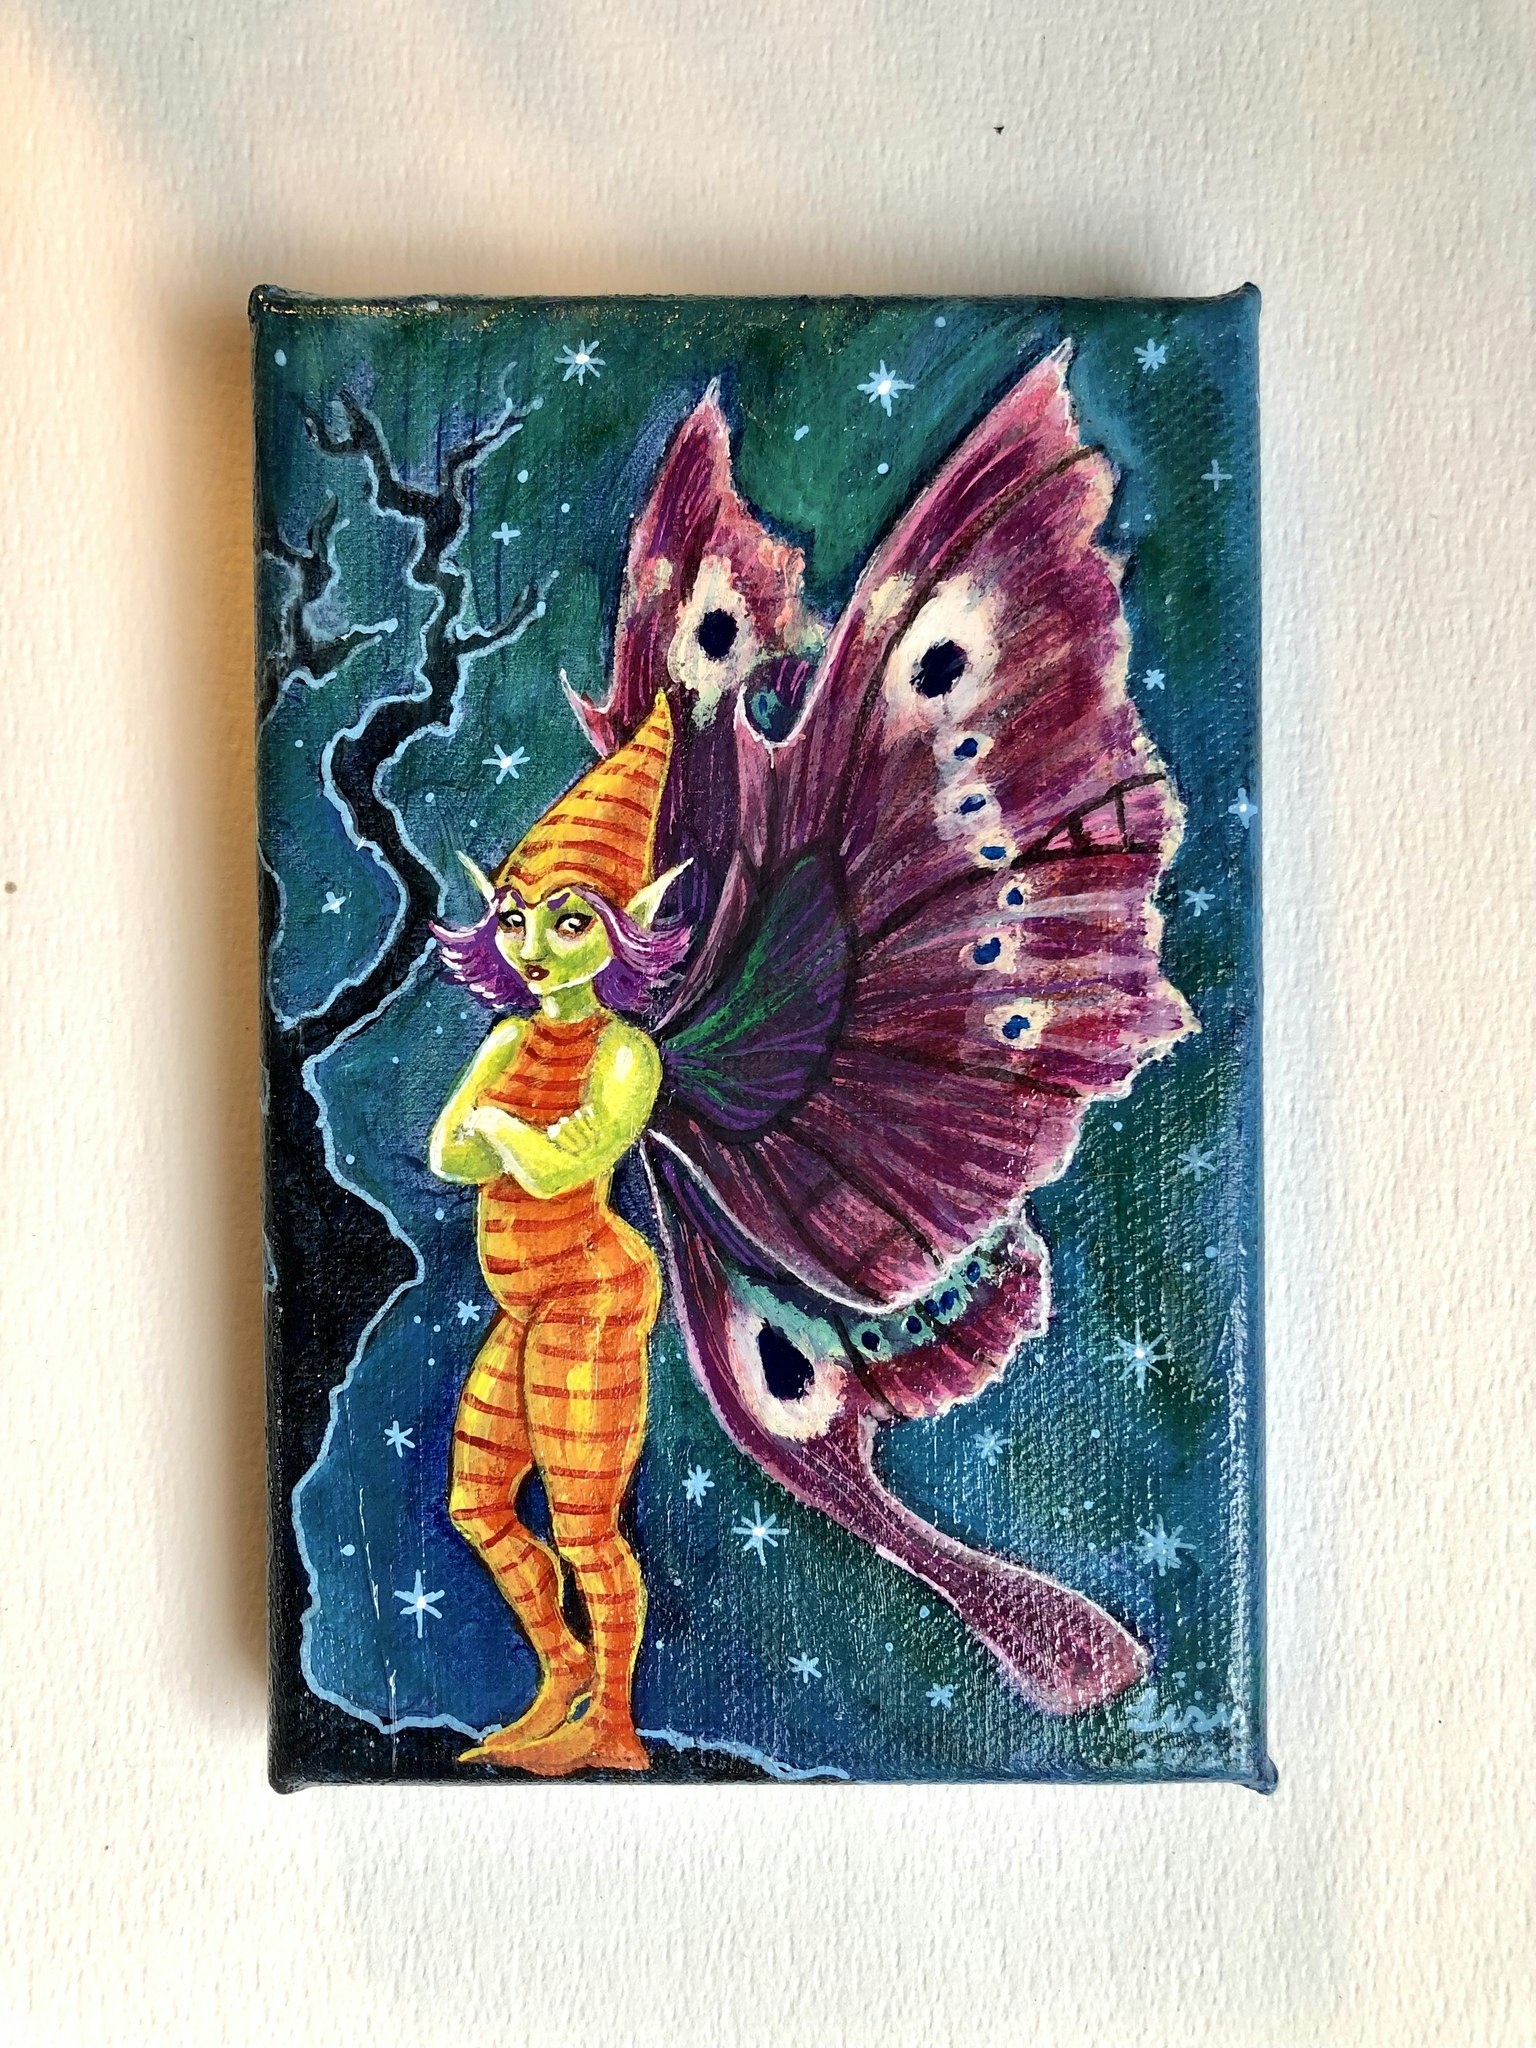 ’Psychedelic Pixie' Original Painting on Canvas